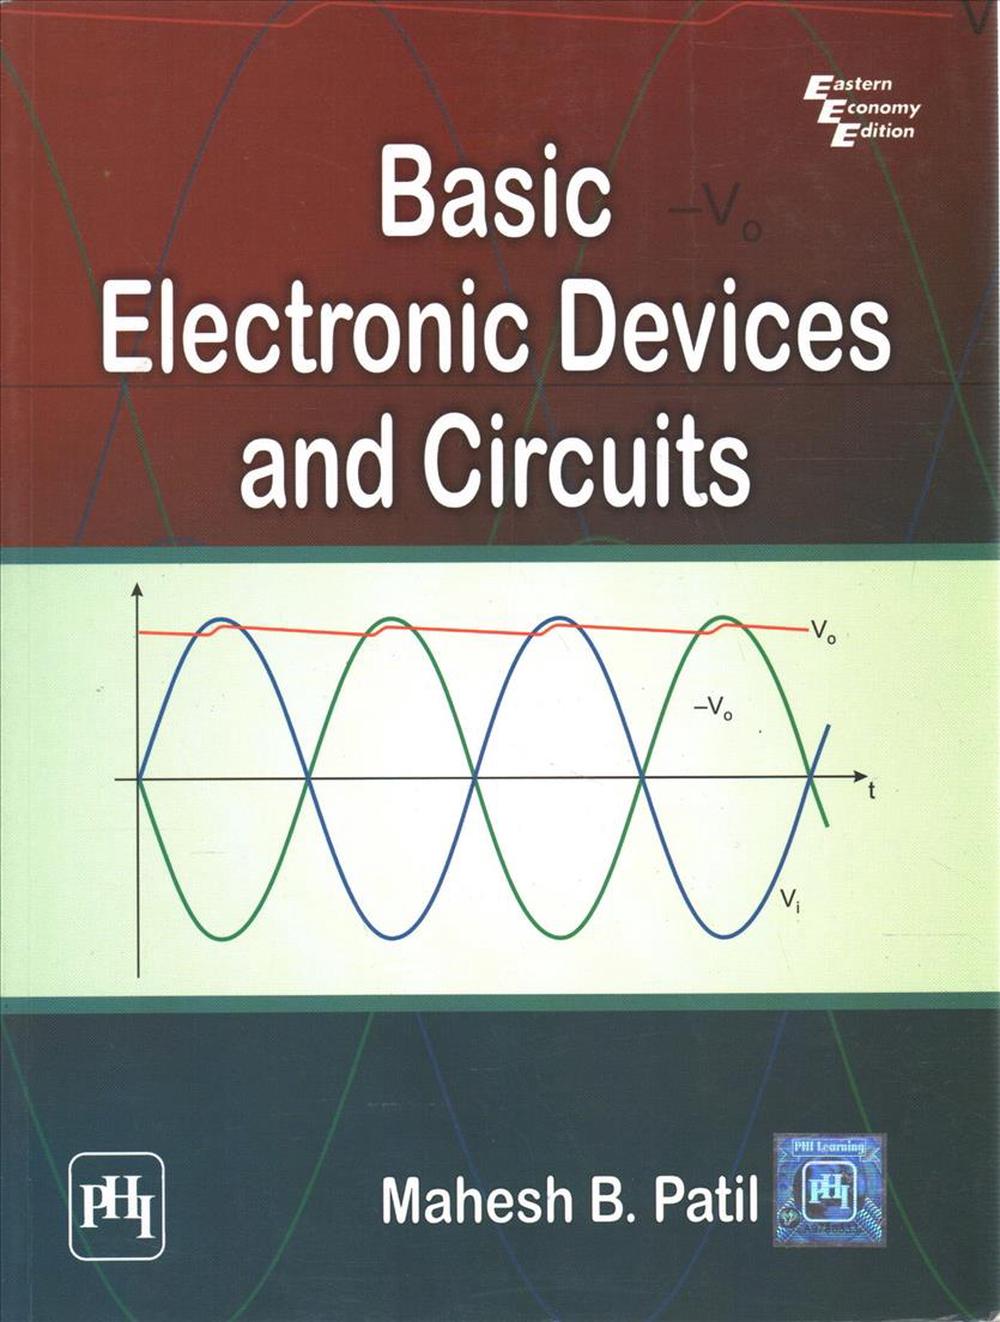 electronic devices and circuits by sanjeev gupta pdf editor